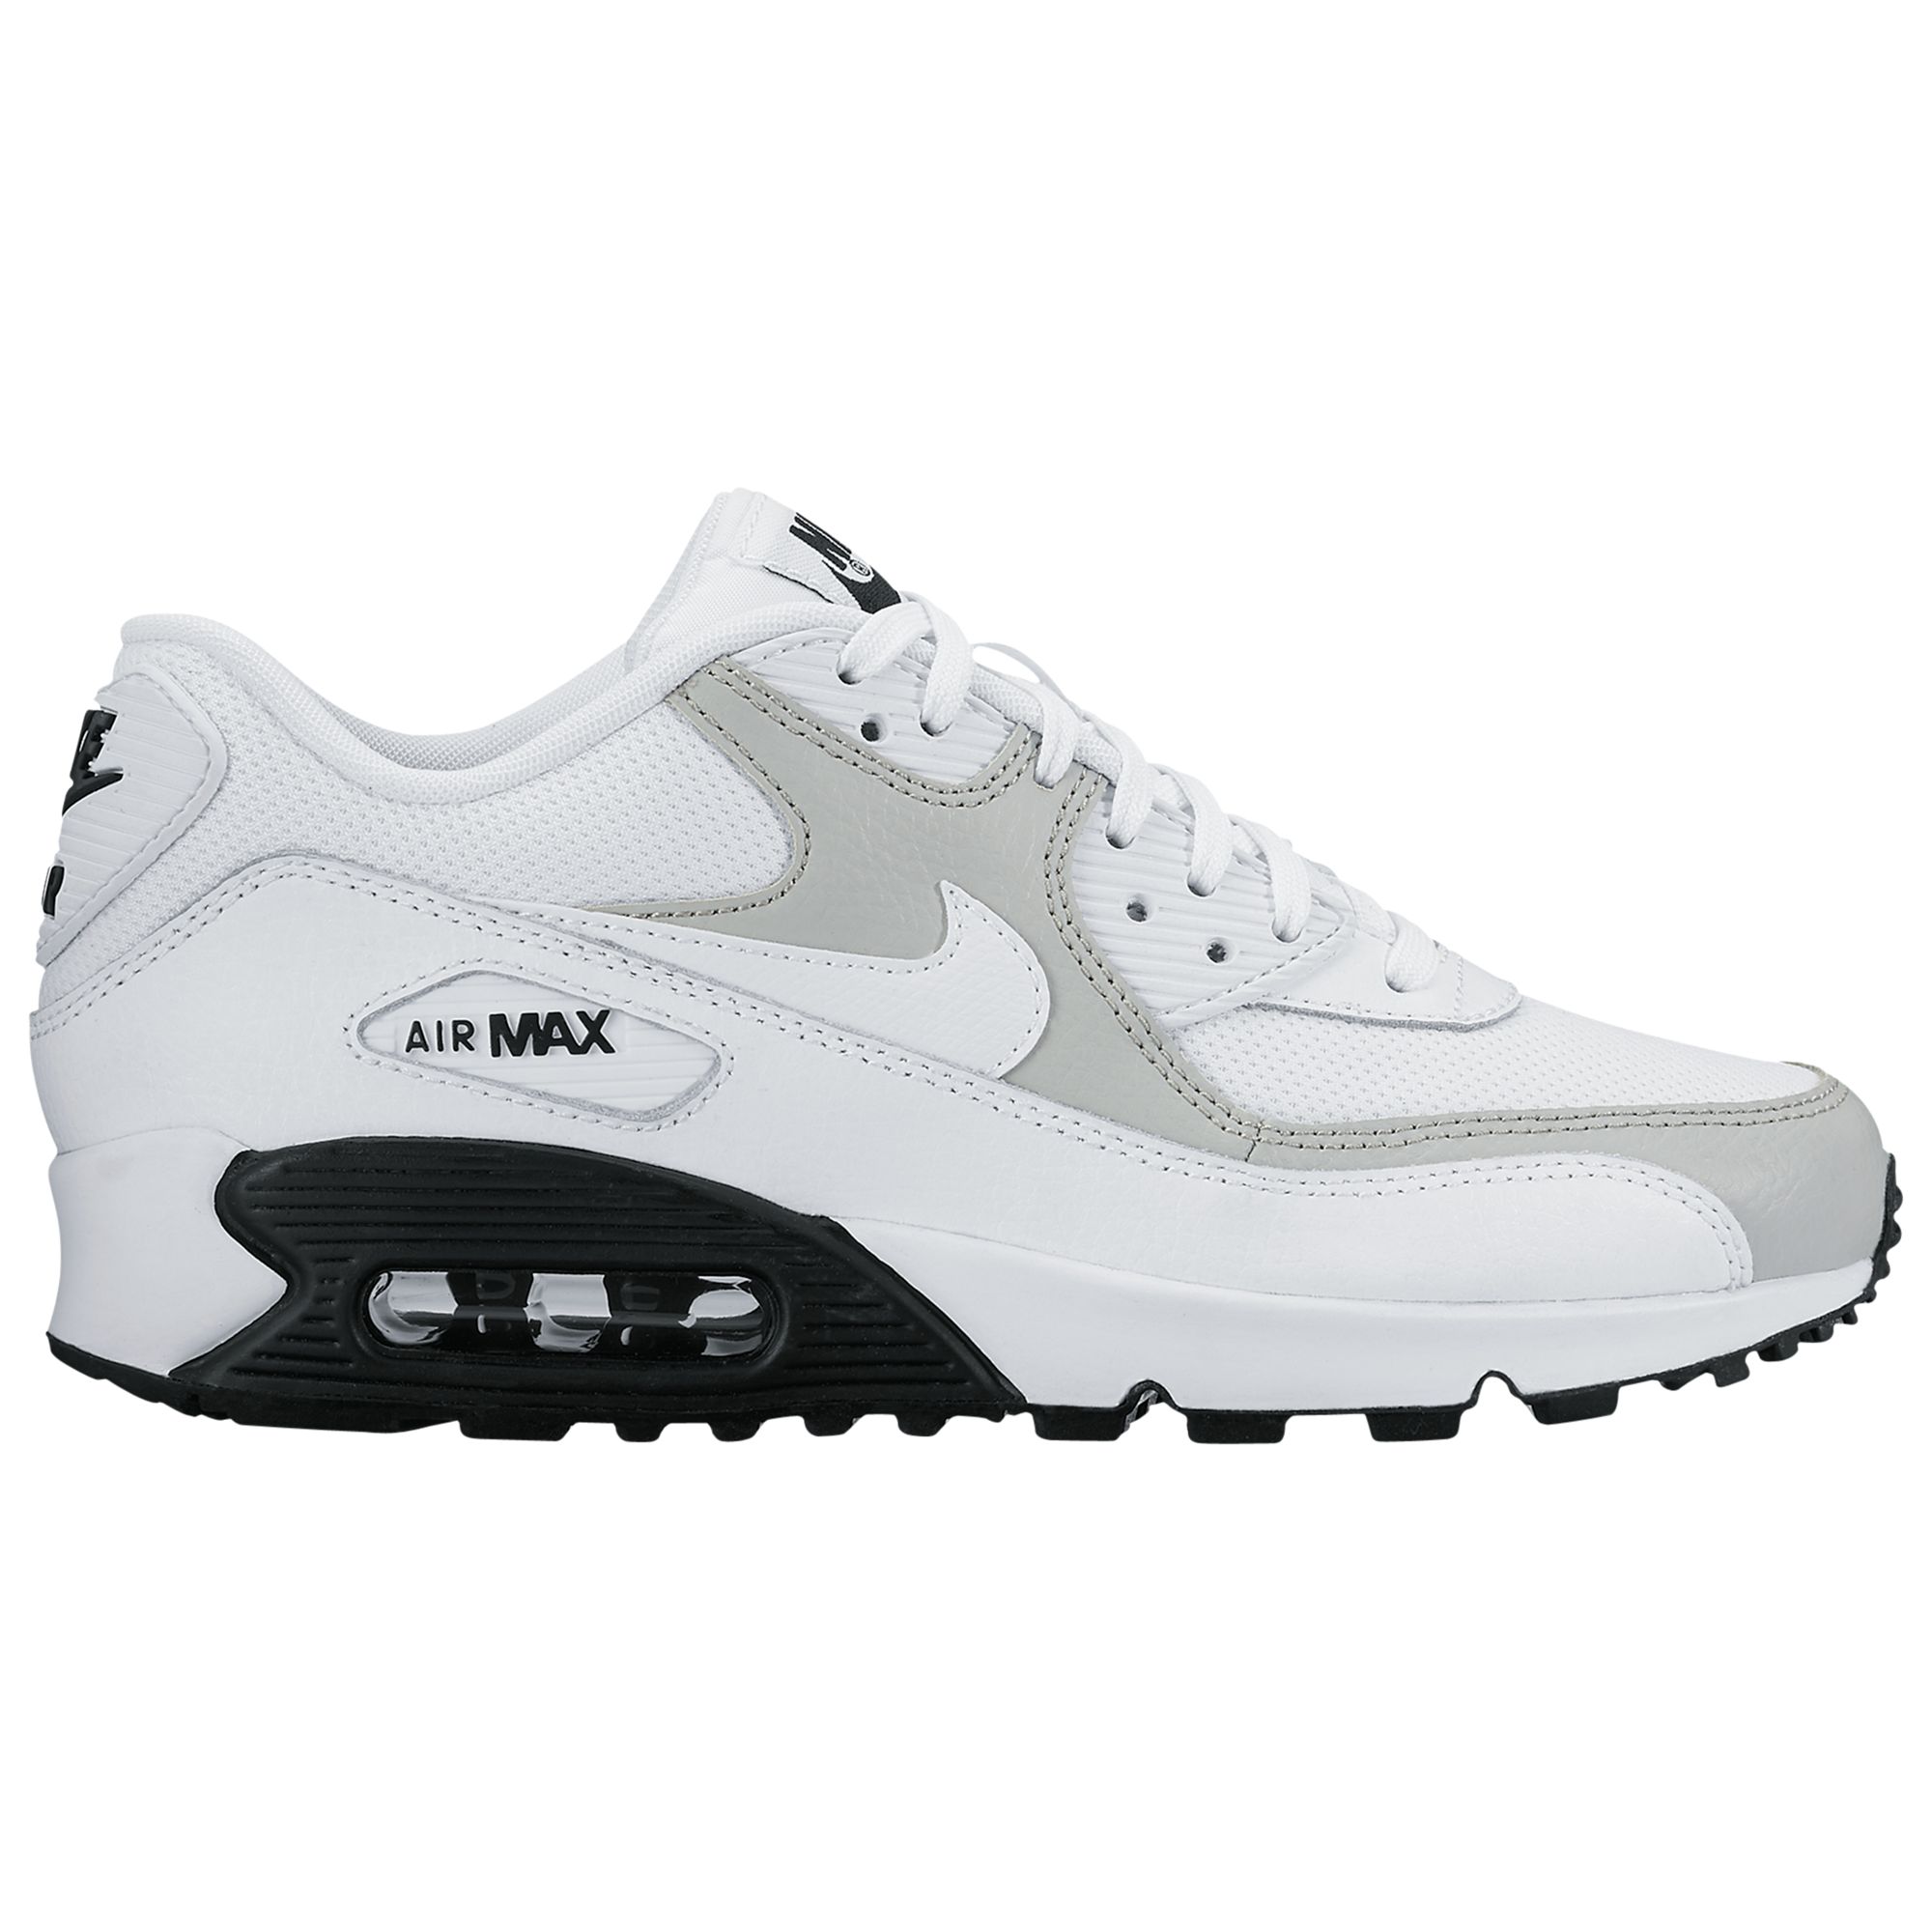 Nike Air Max 90 Women's Trainers, White/Wolf Grey